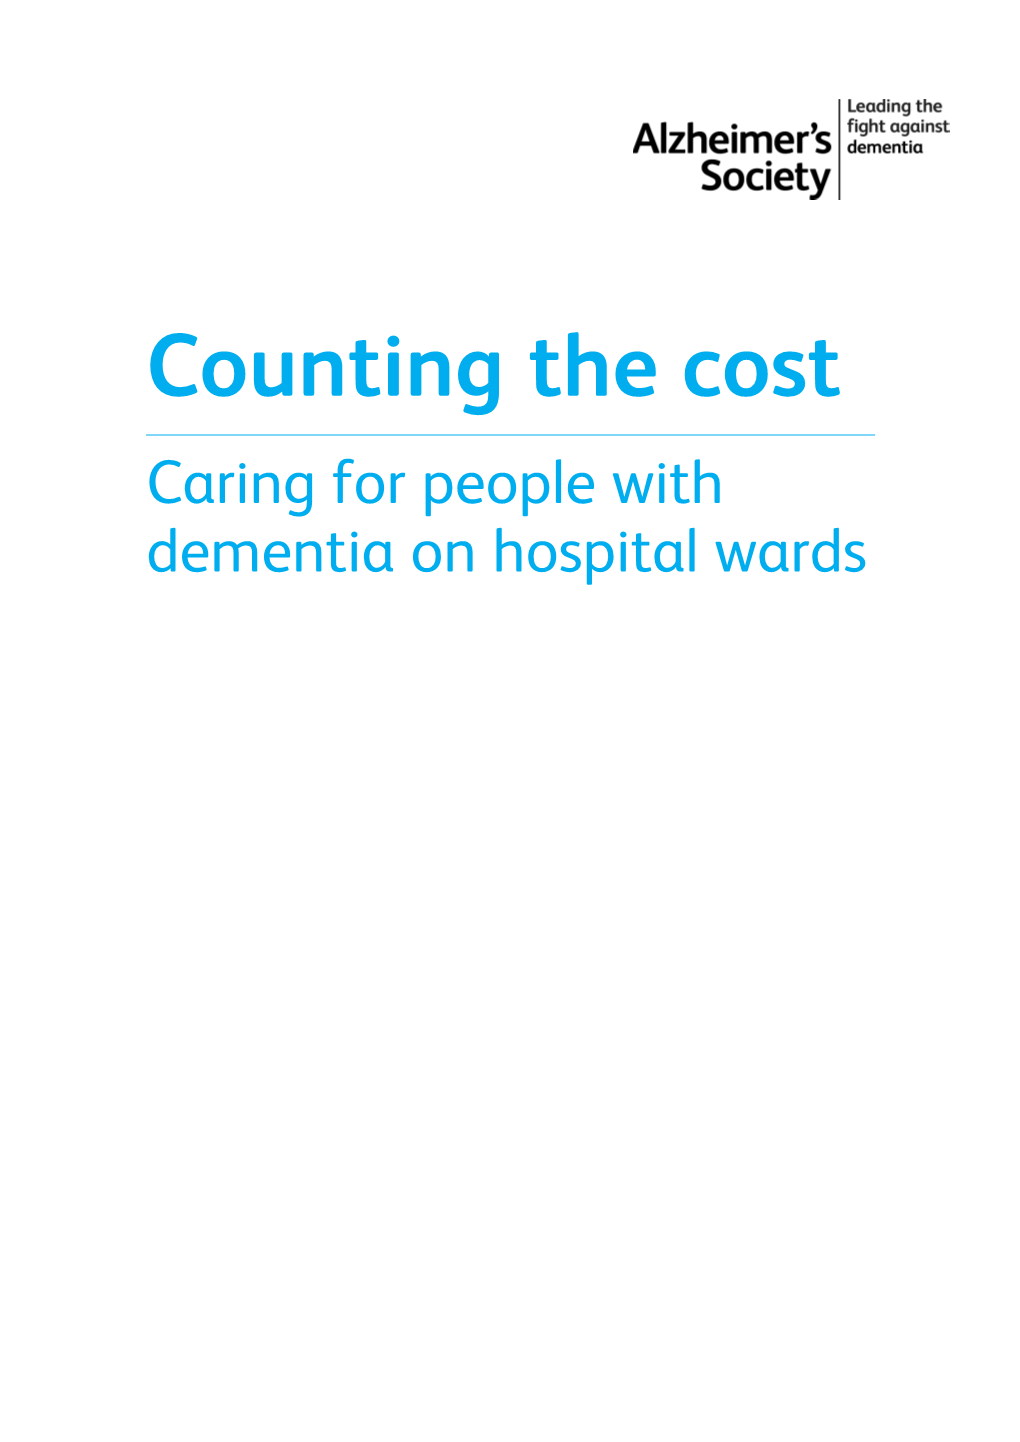 Counting the Cost: Caring for People with Dementia on Hospital Wards